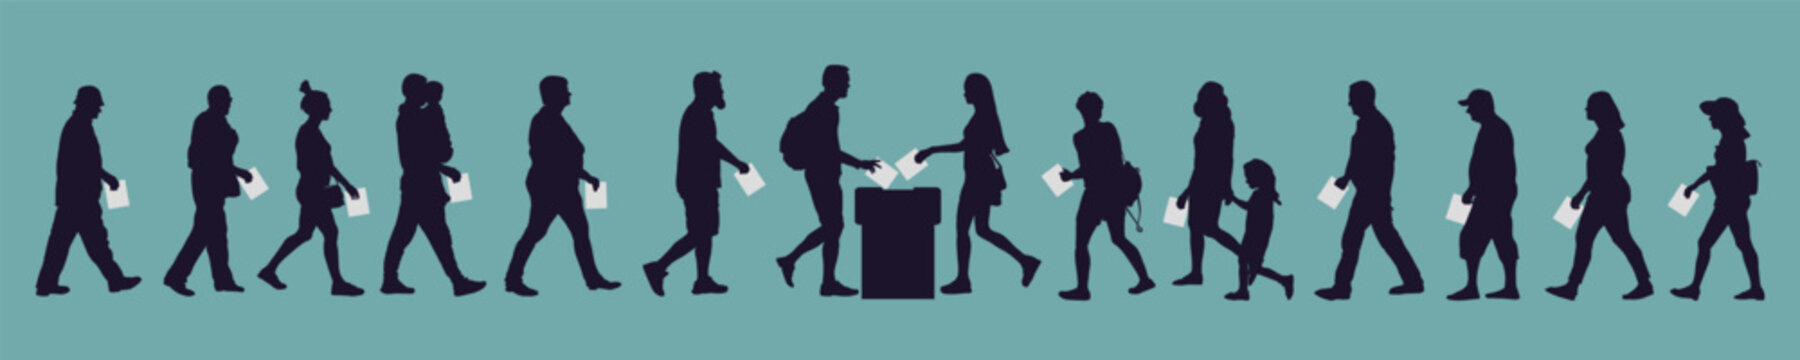 Election, silhouette of people voting. Crowd of citizens and voting box. Vector illustration